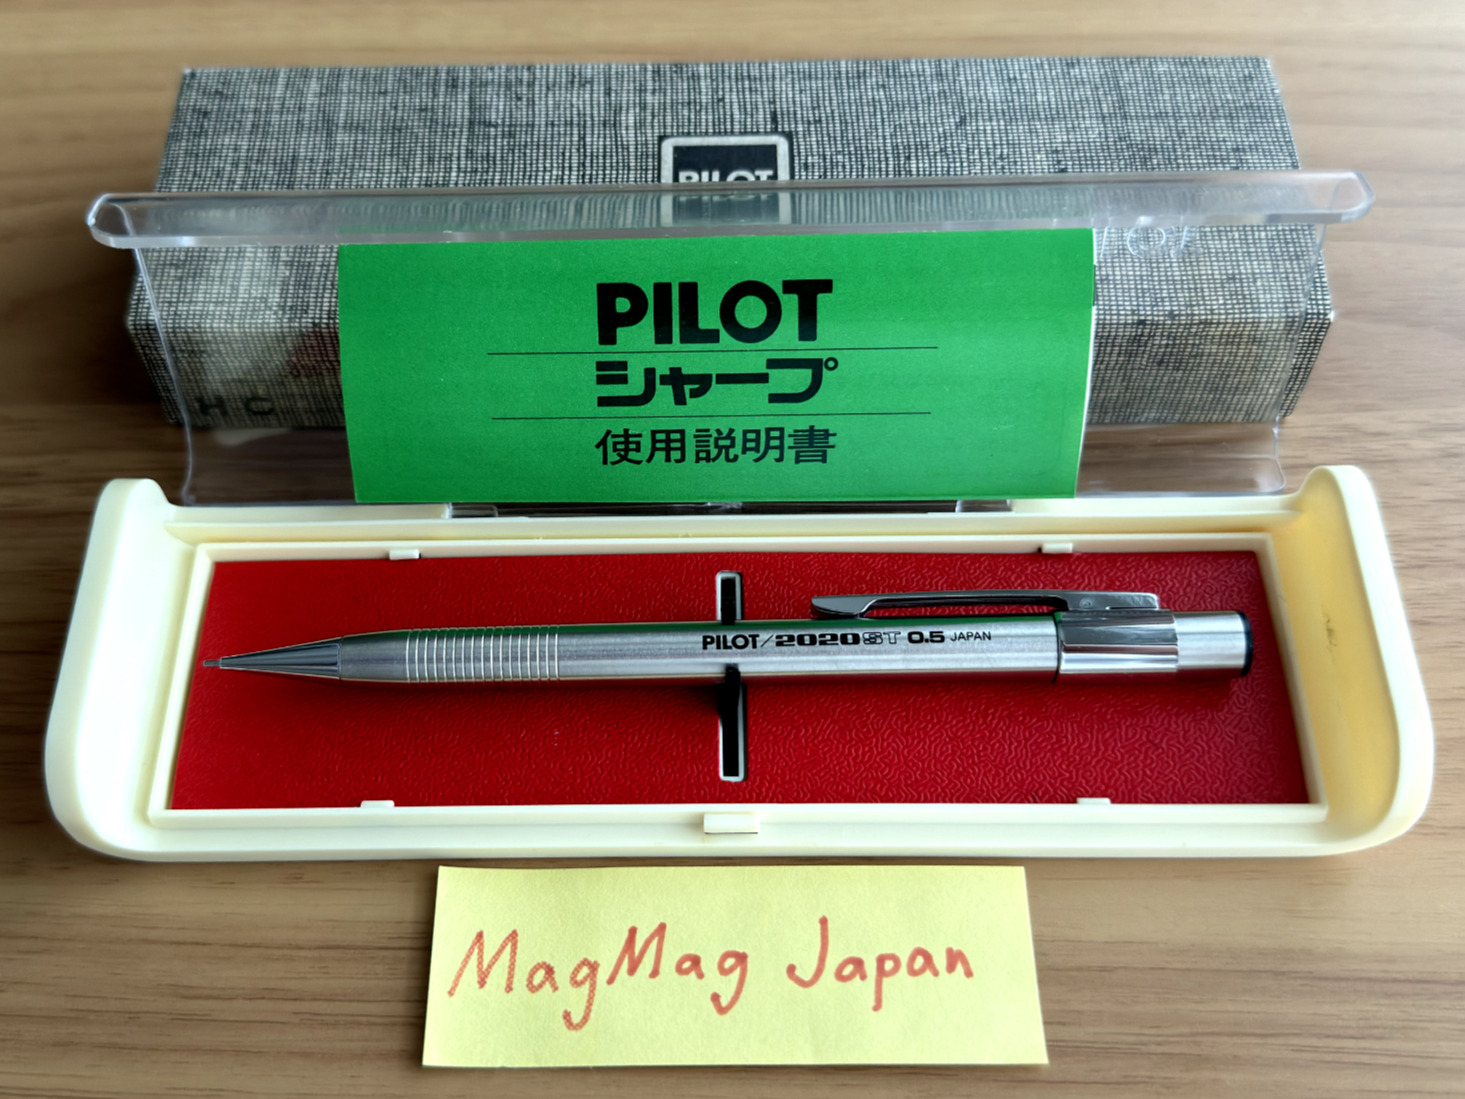 NOS Pilot 2020 ST Vintage Shaker Mechanical Pencil 0.5mm Discontinued With BOX